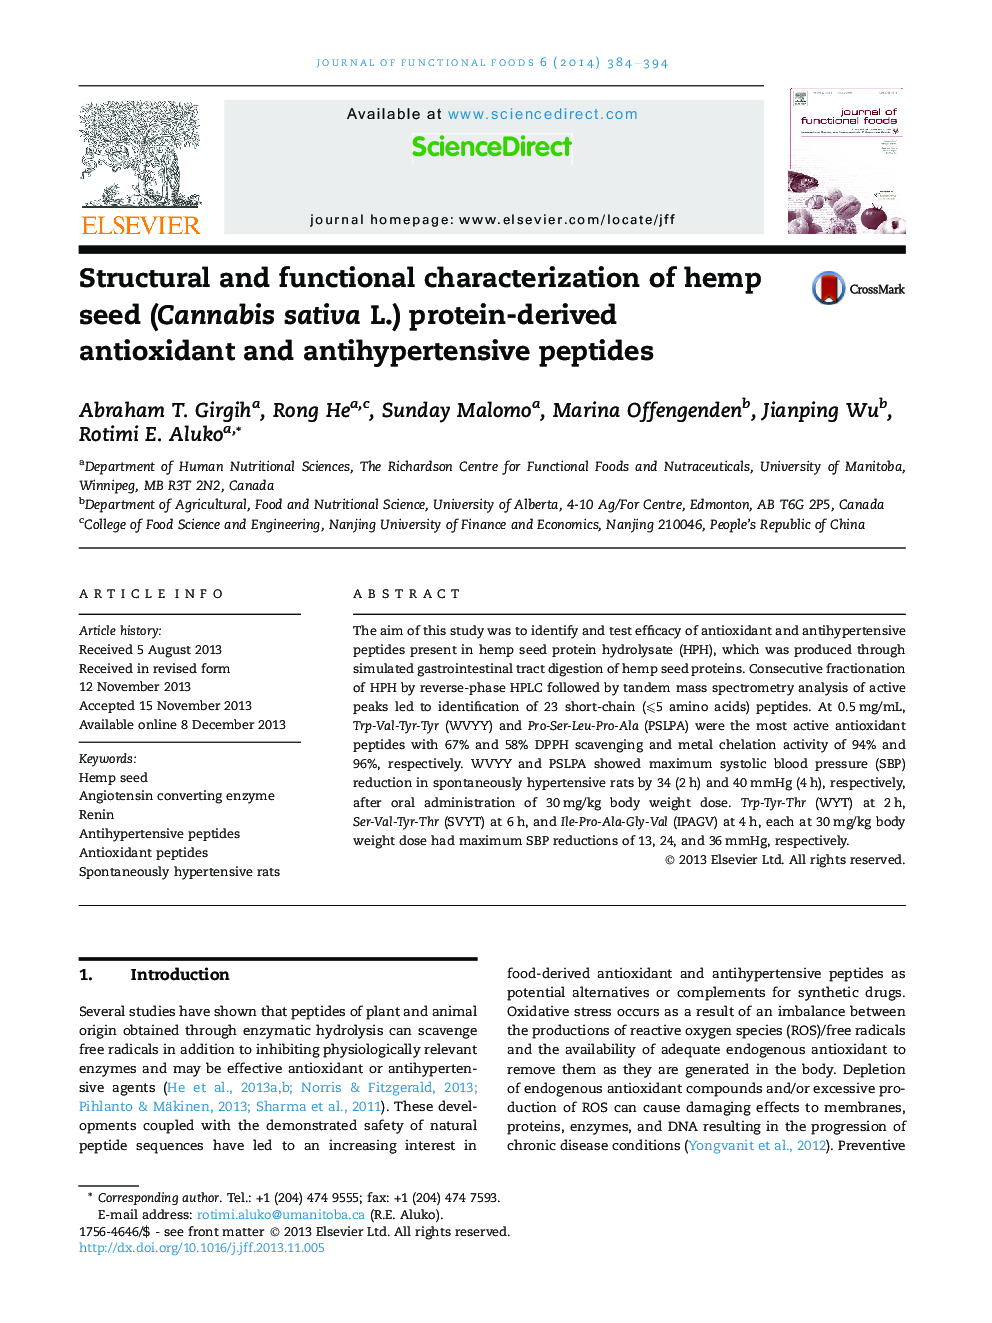 Structural and functional characterization of hemp seed (Cannabis sativa L.) protein-derived antioxidant and antihypertensive peptides